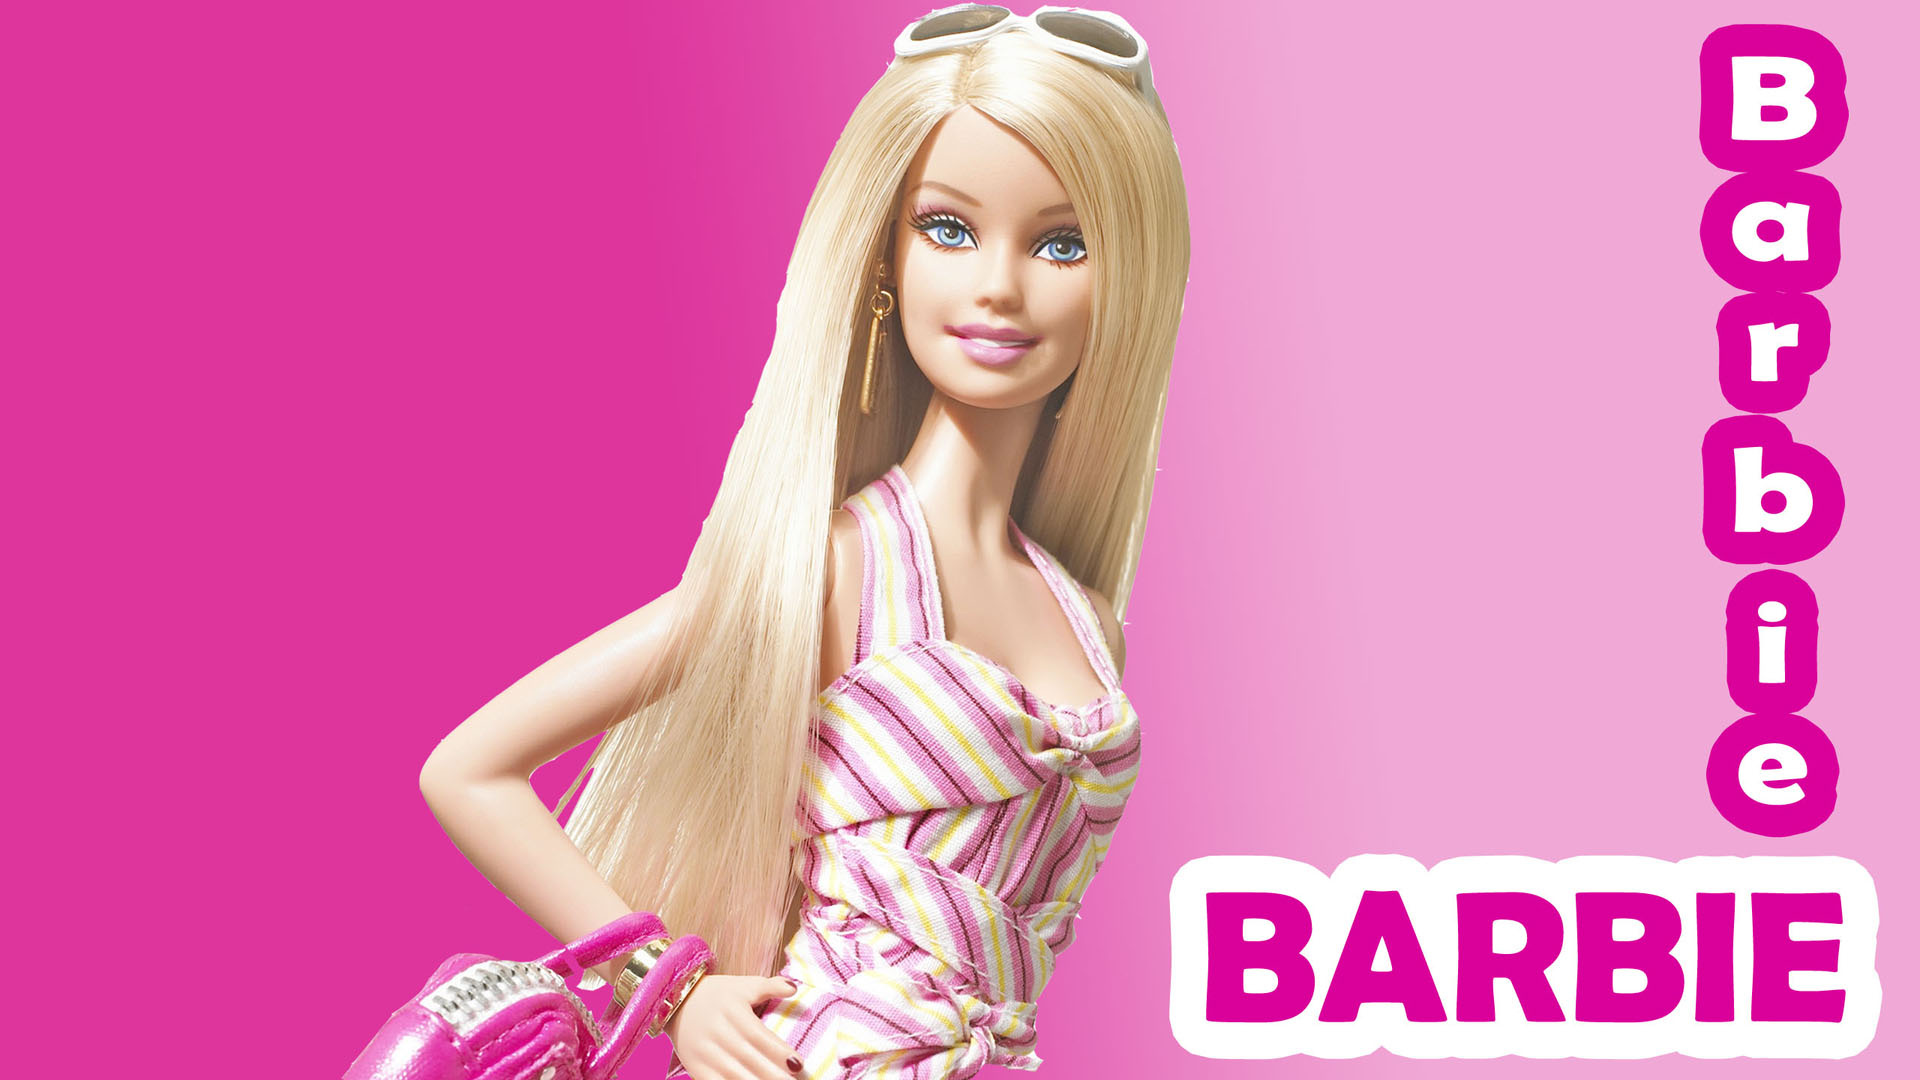 HD Barbie wallpapers, Crystal-clear images, Perfect for screens, Barbie world, 1920x1080 Full HD Desktop